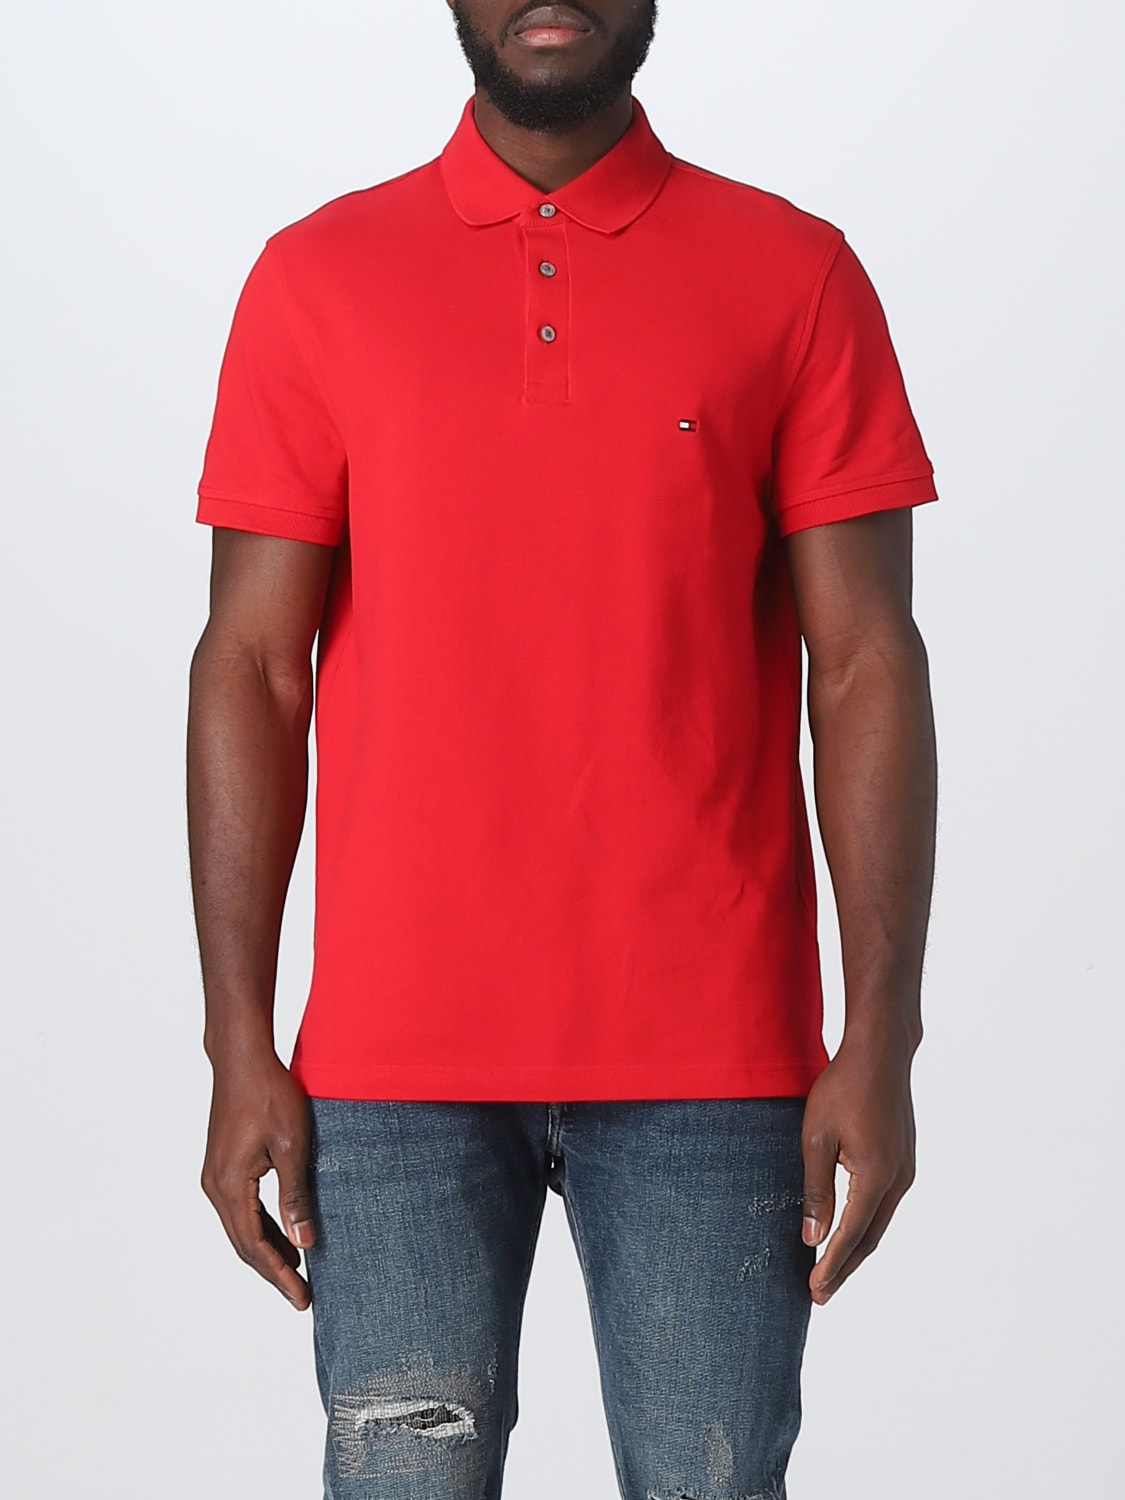 Tommy Hilfiger Outlet: polo for man - Red | Tommy Hilfiger shirt online GIGLIO.COM